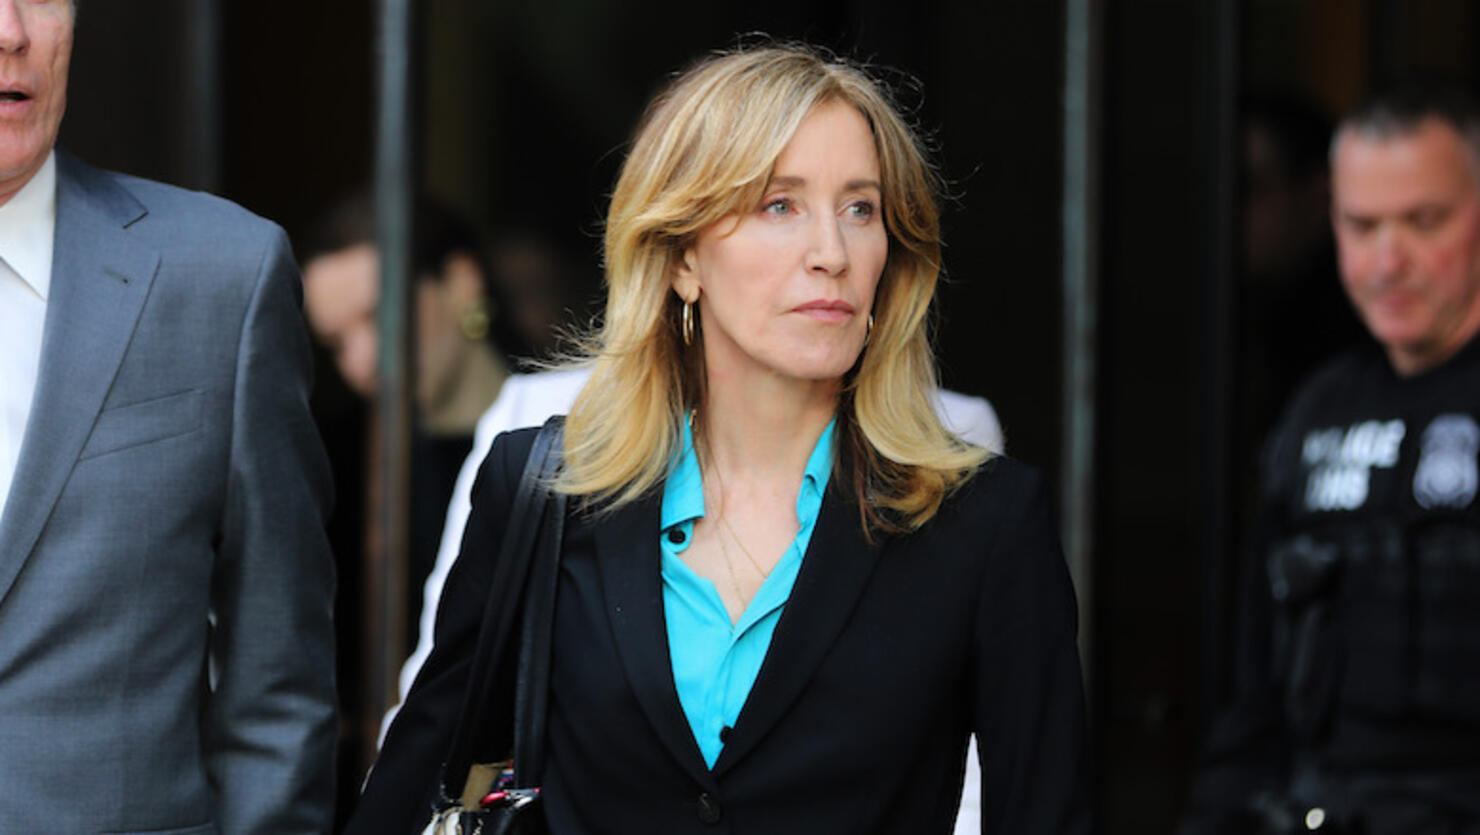 Felicity Huffman, Lori Loughlin Arrive At Boston Court For College Cheating Case